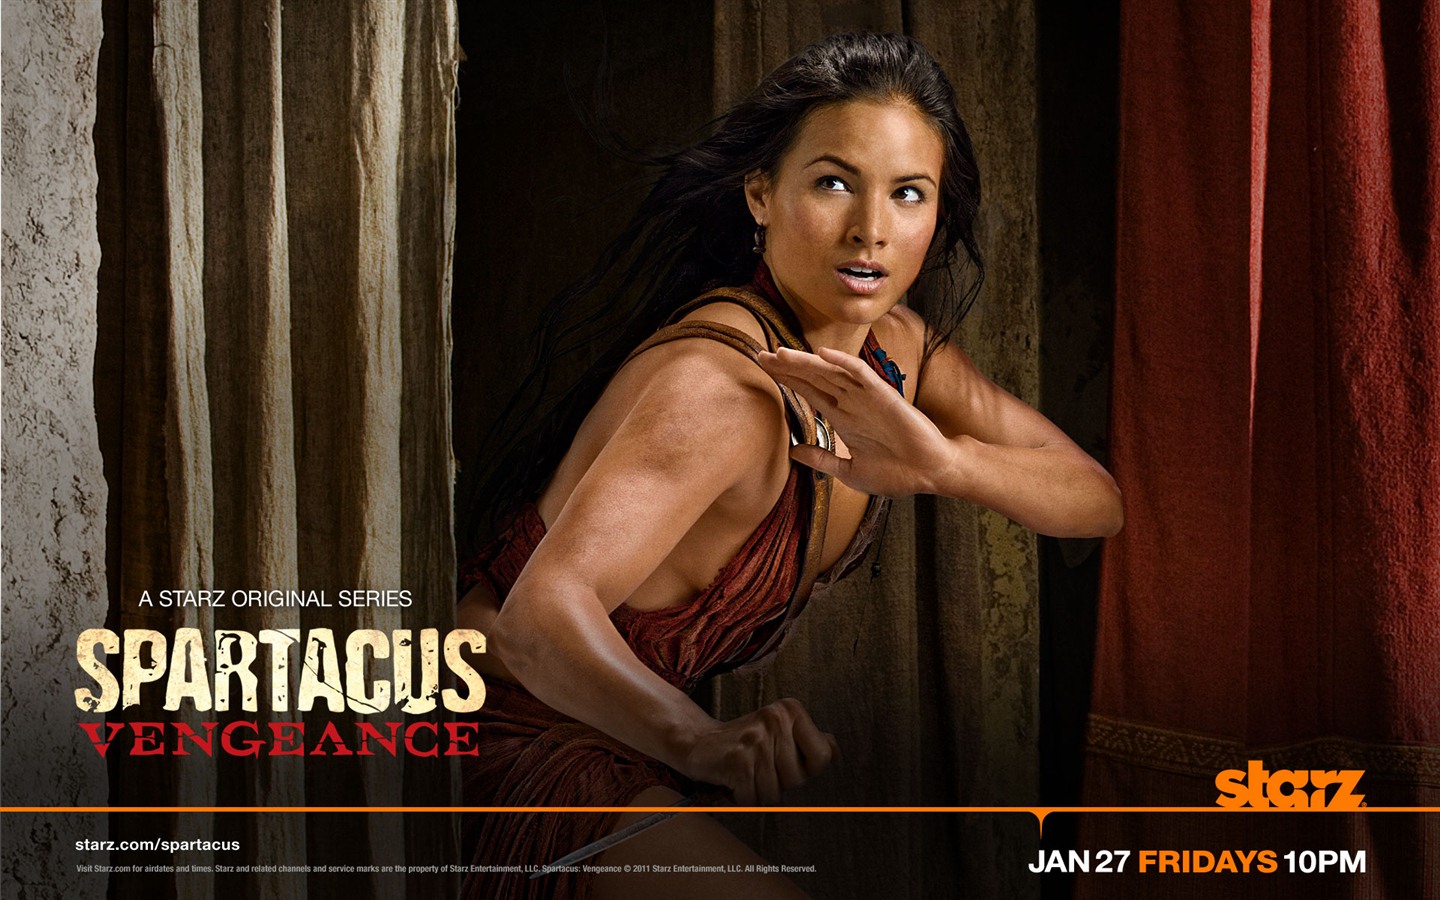 Spartacus: Vengeance HD wallpapers #7 - 1440x900